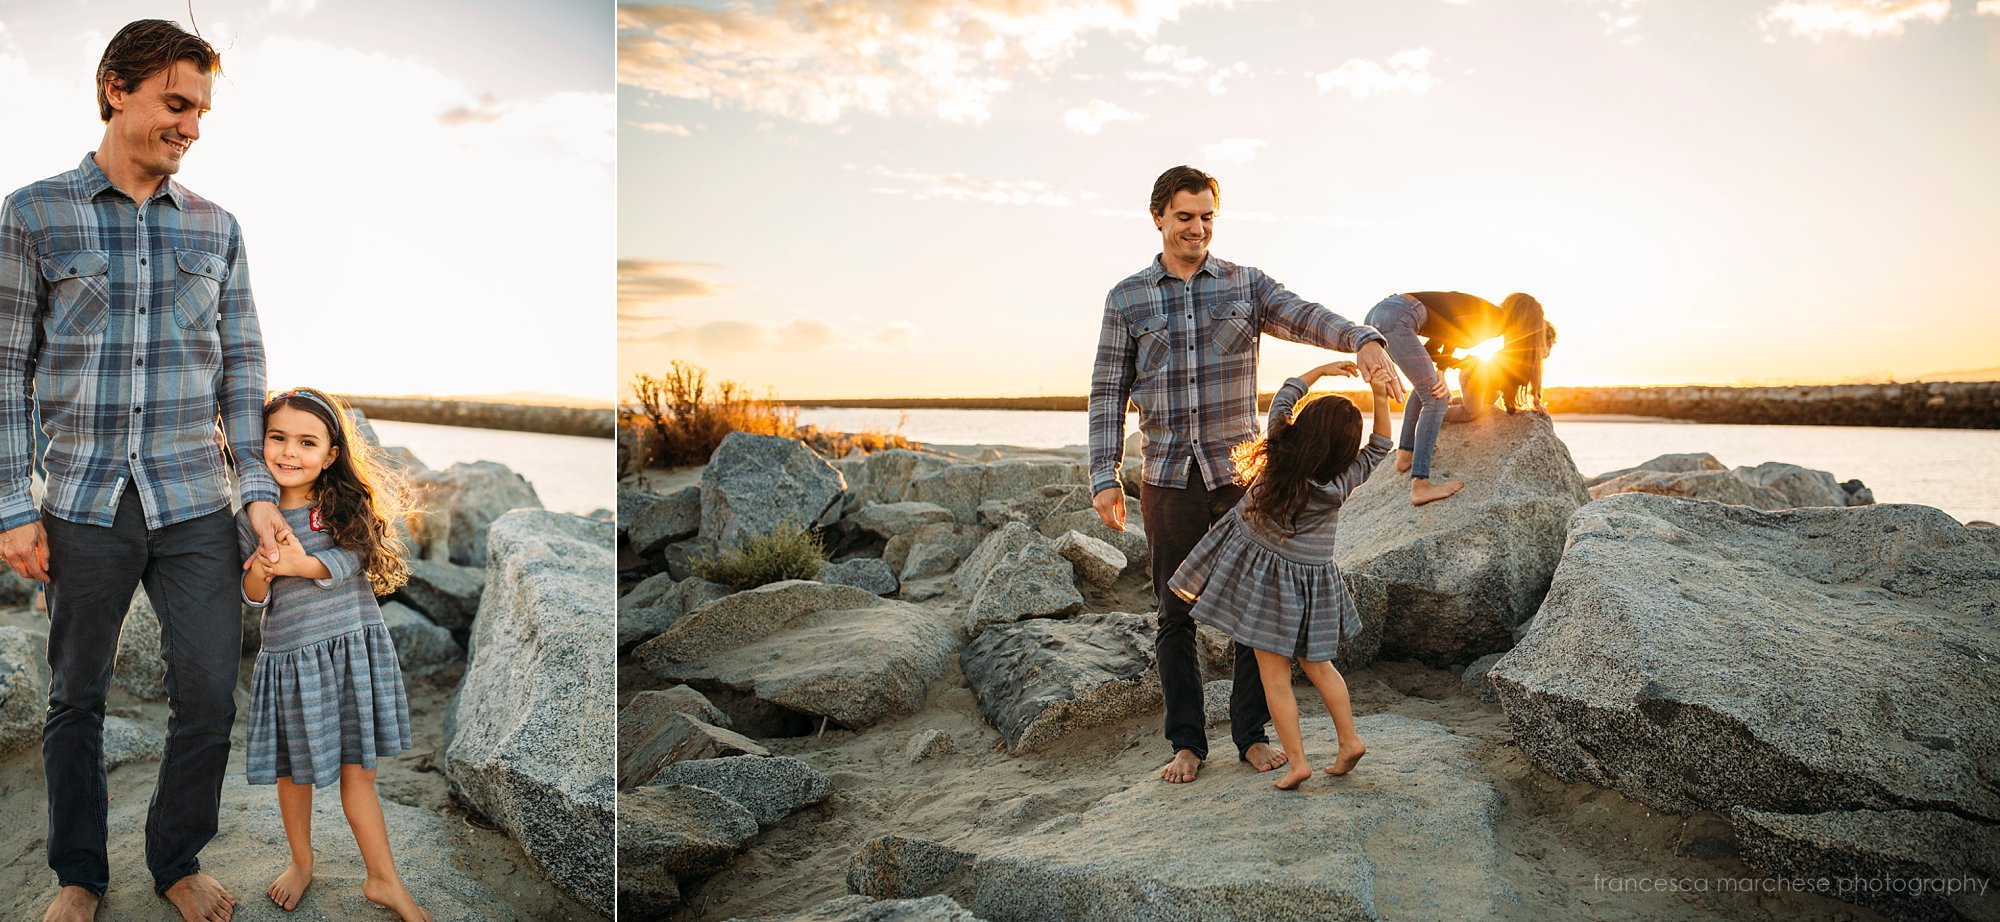 daddy and daughter dancing - Francesca Marchese Photography Orange County beach family golden hour session